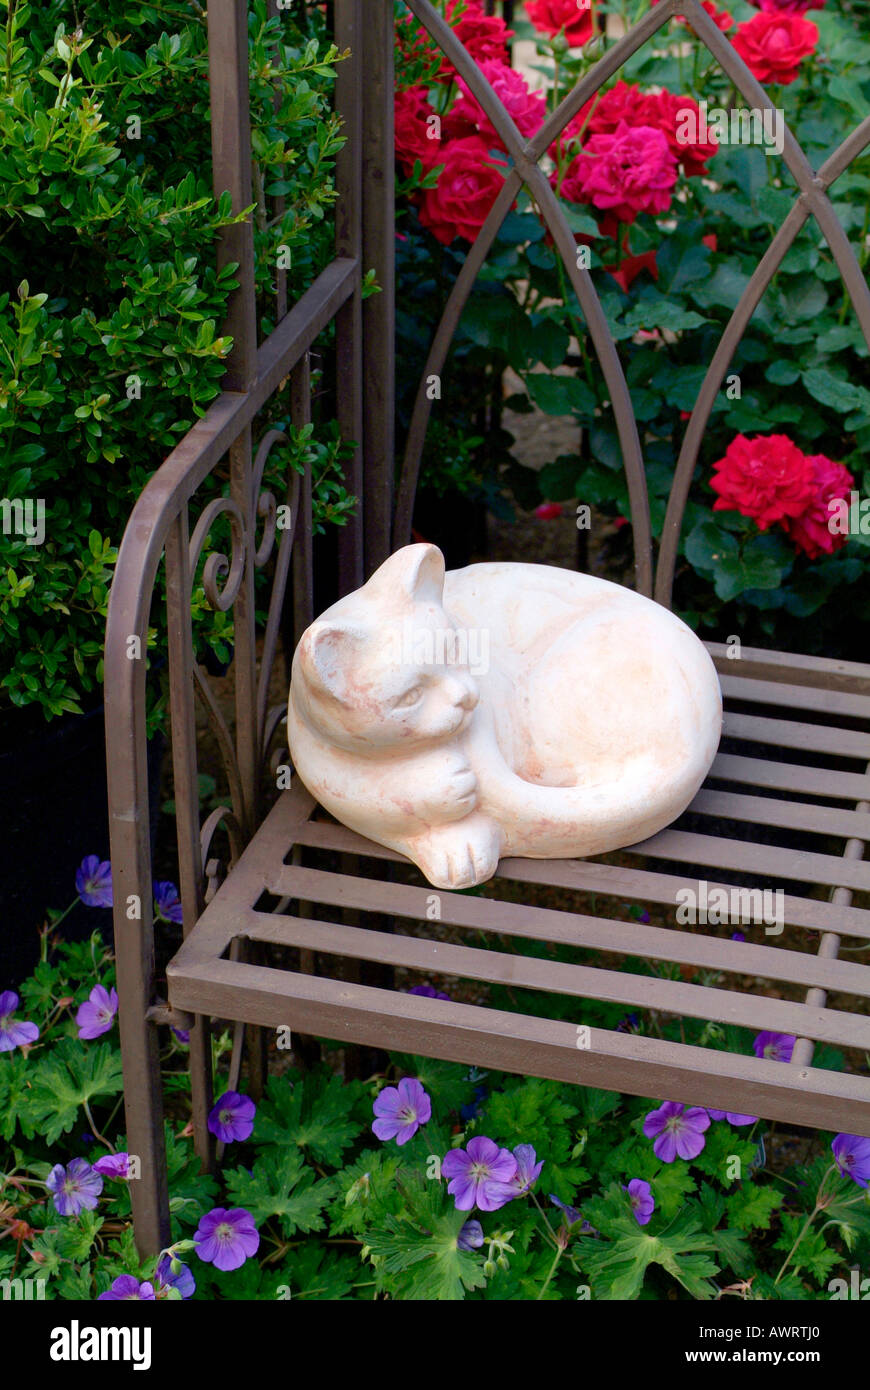 Garden deco, stone cat is lying on a metal bench in front of buxus, roses rosa and geranium Stock Photo